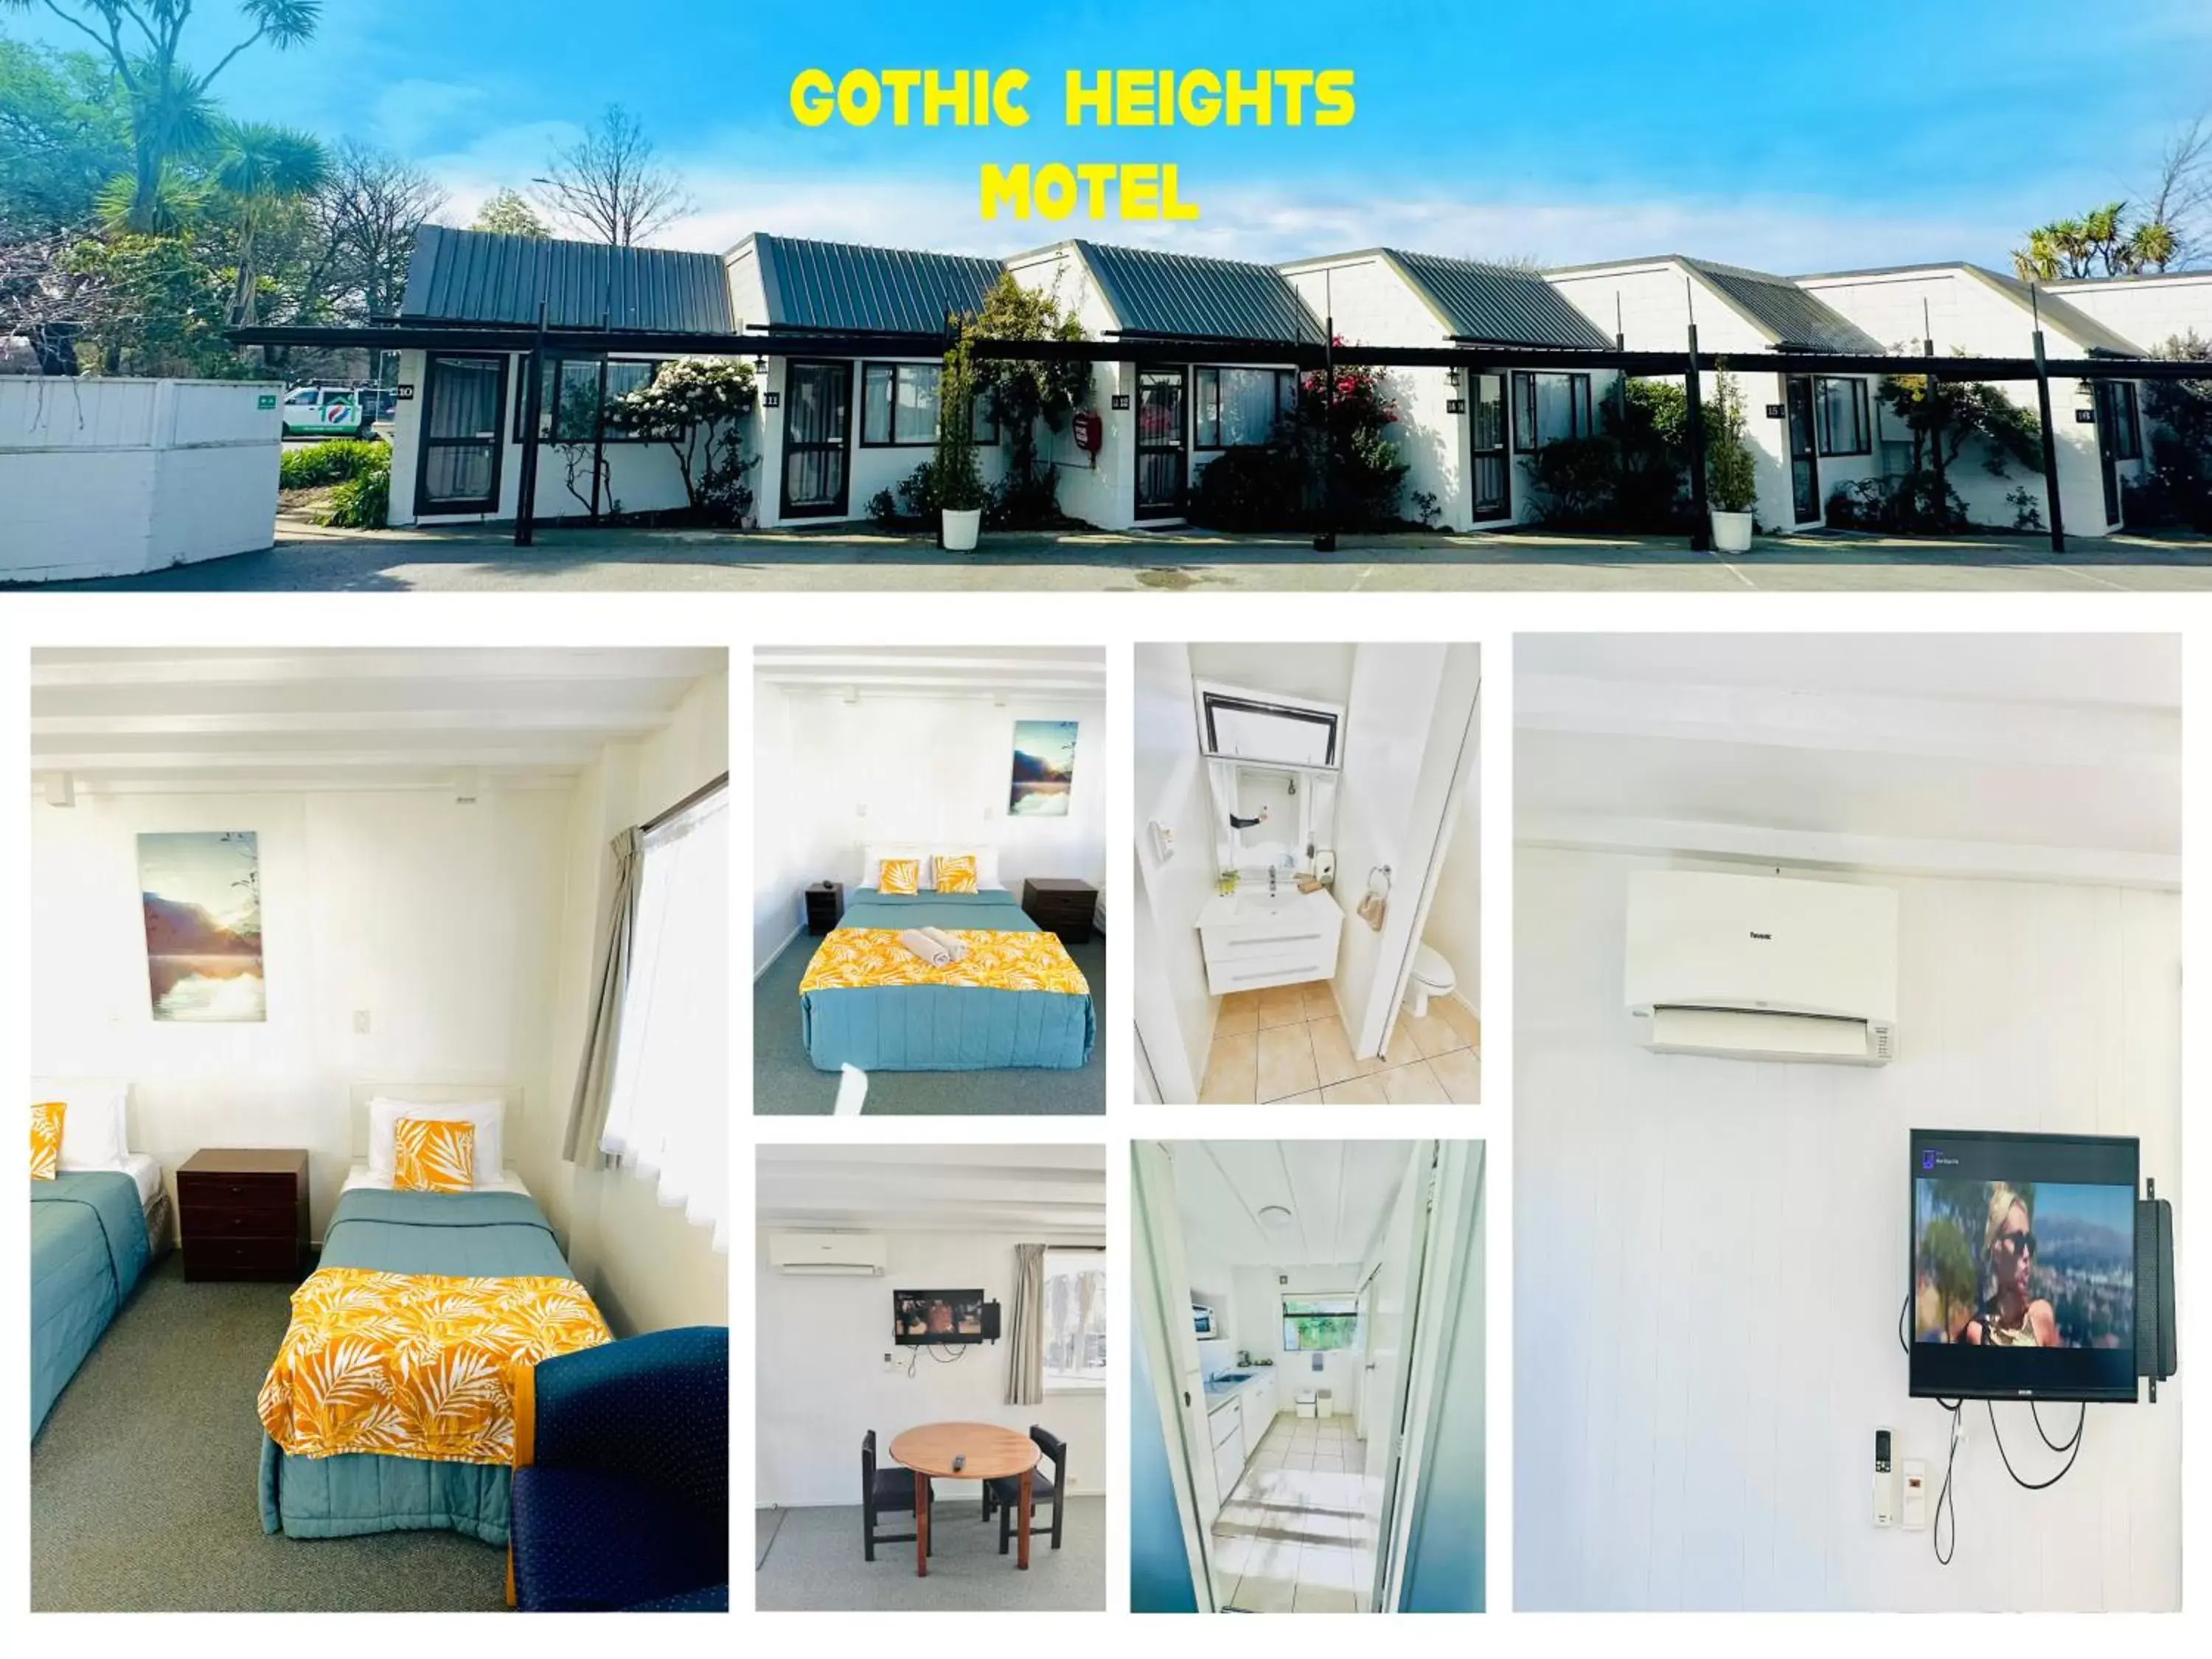 Gothic Heights Motel